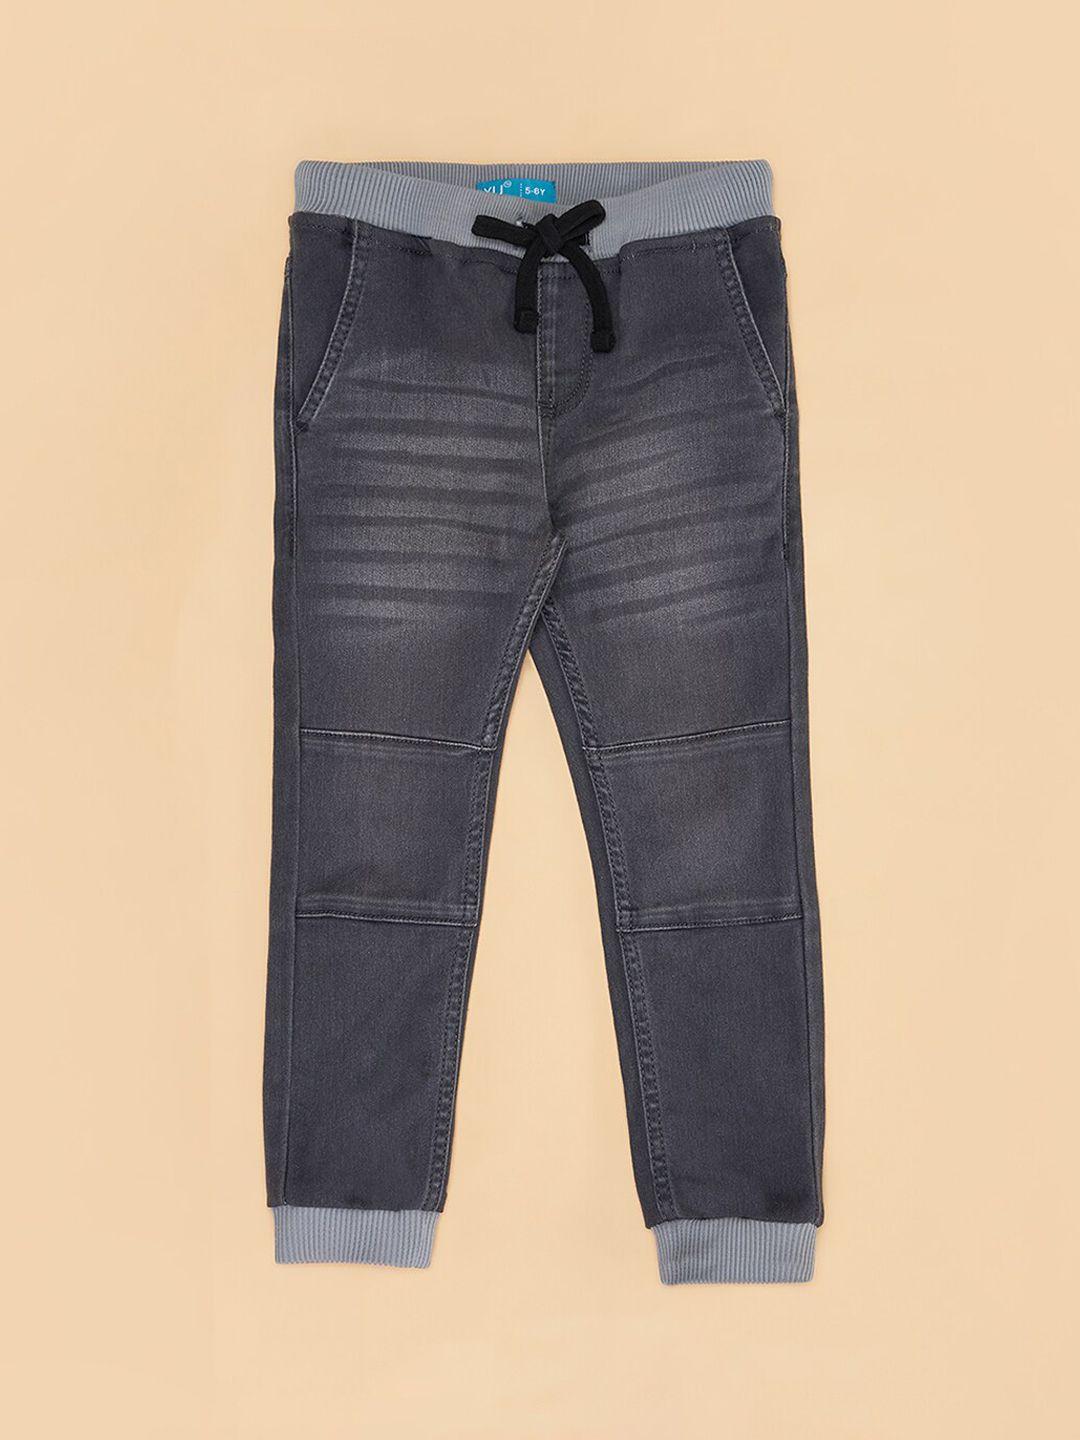 yu-by-pantaloons-boys-slim-fit-clean-look-stretchable-jeans